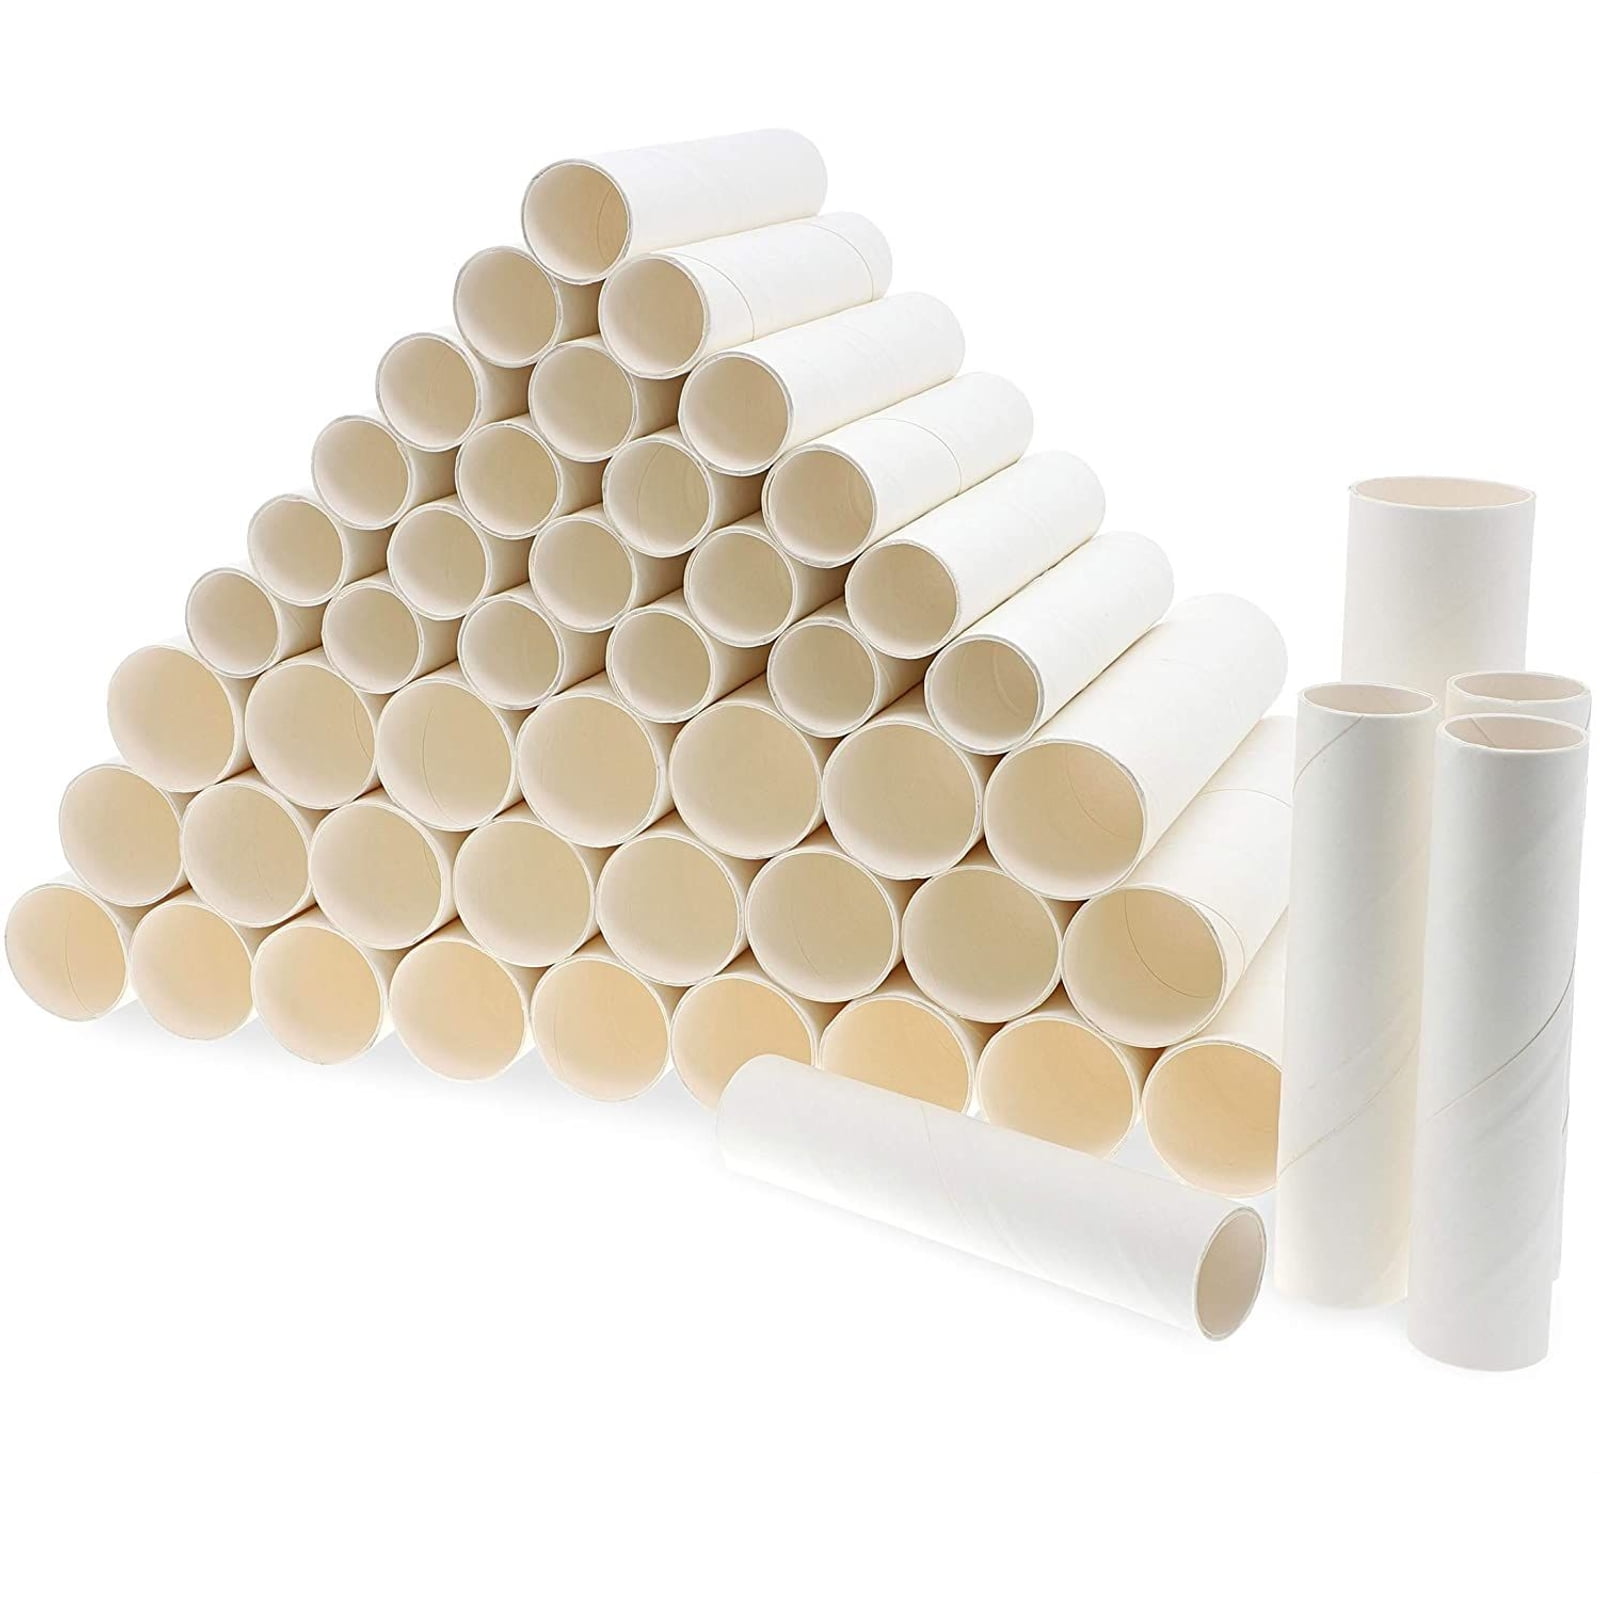 50 Pack White Cardboard Rolls For Diy Crafts Empty Toilet Paper Towel S 2 Sizes 7 5 6 In Com